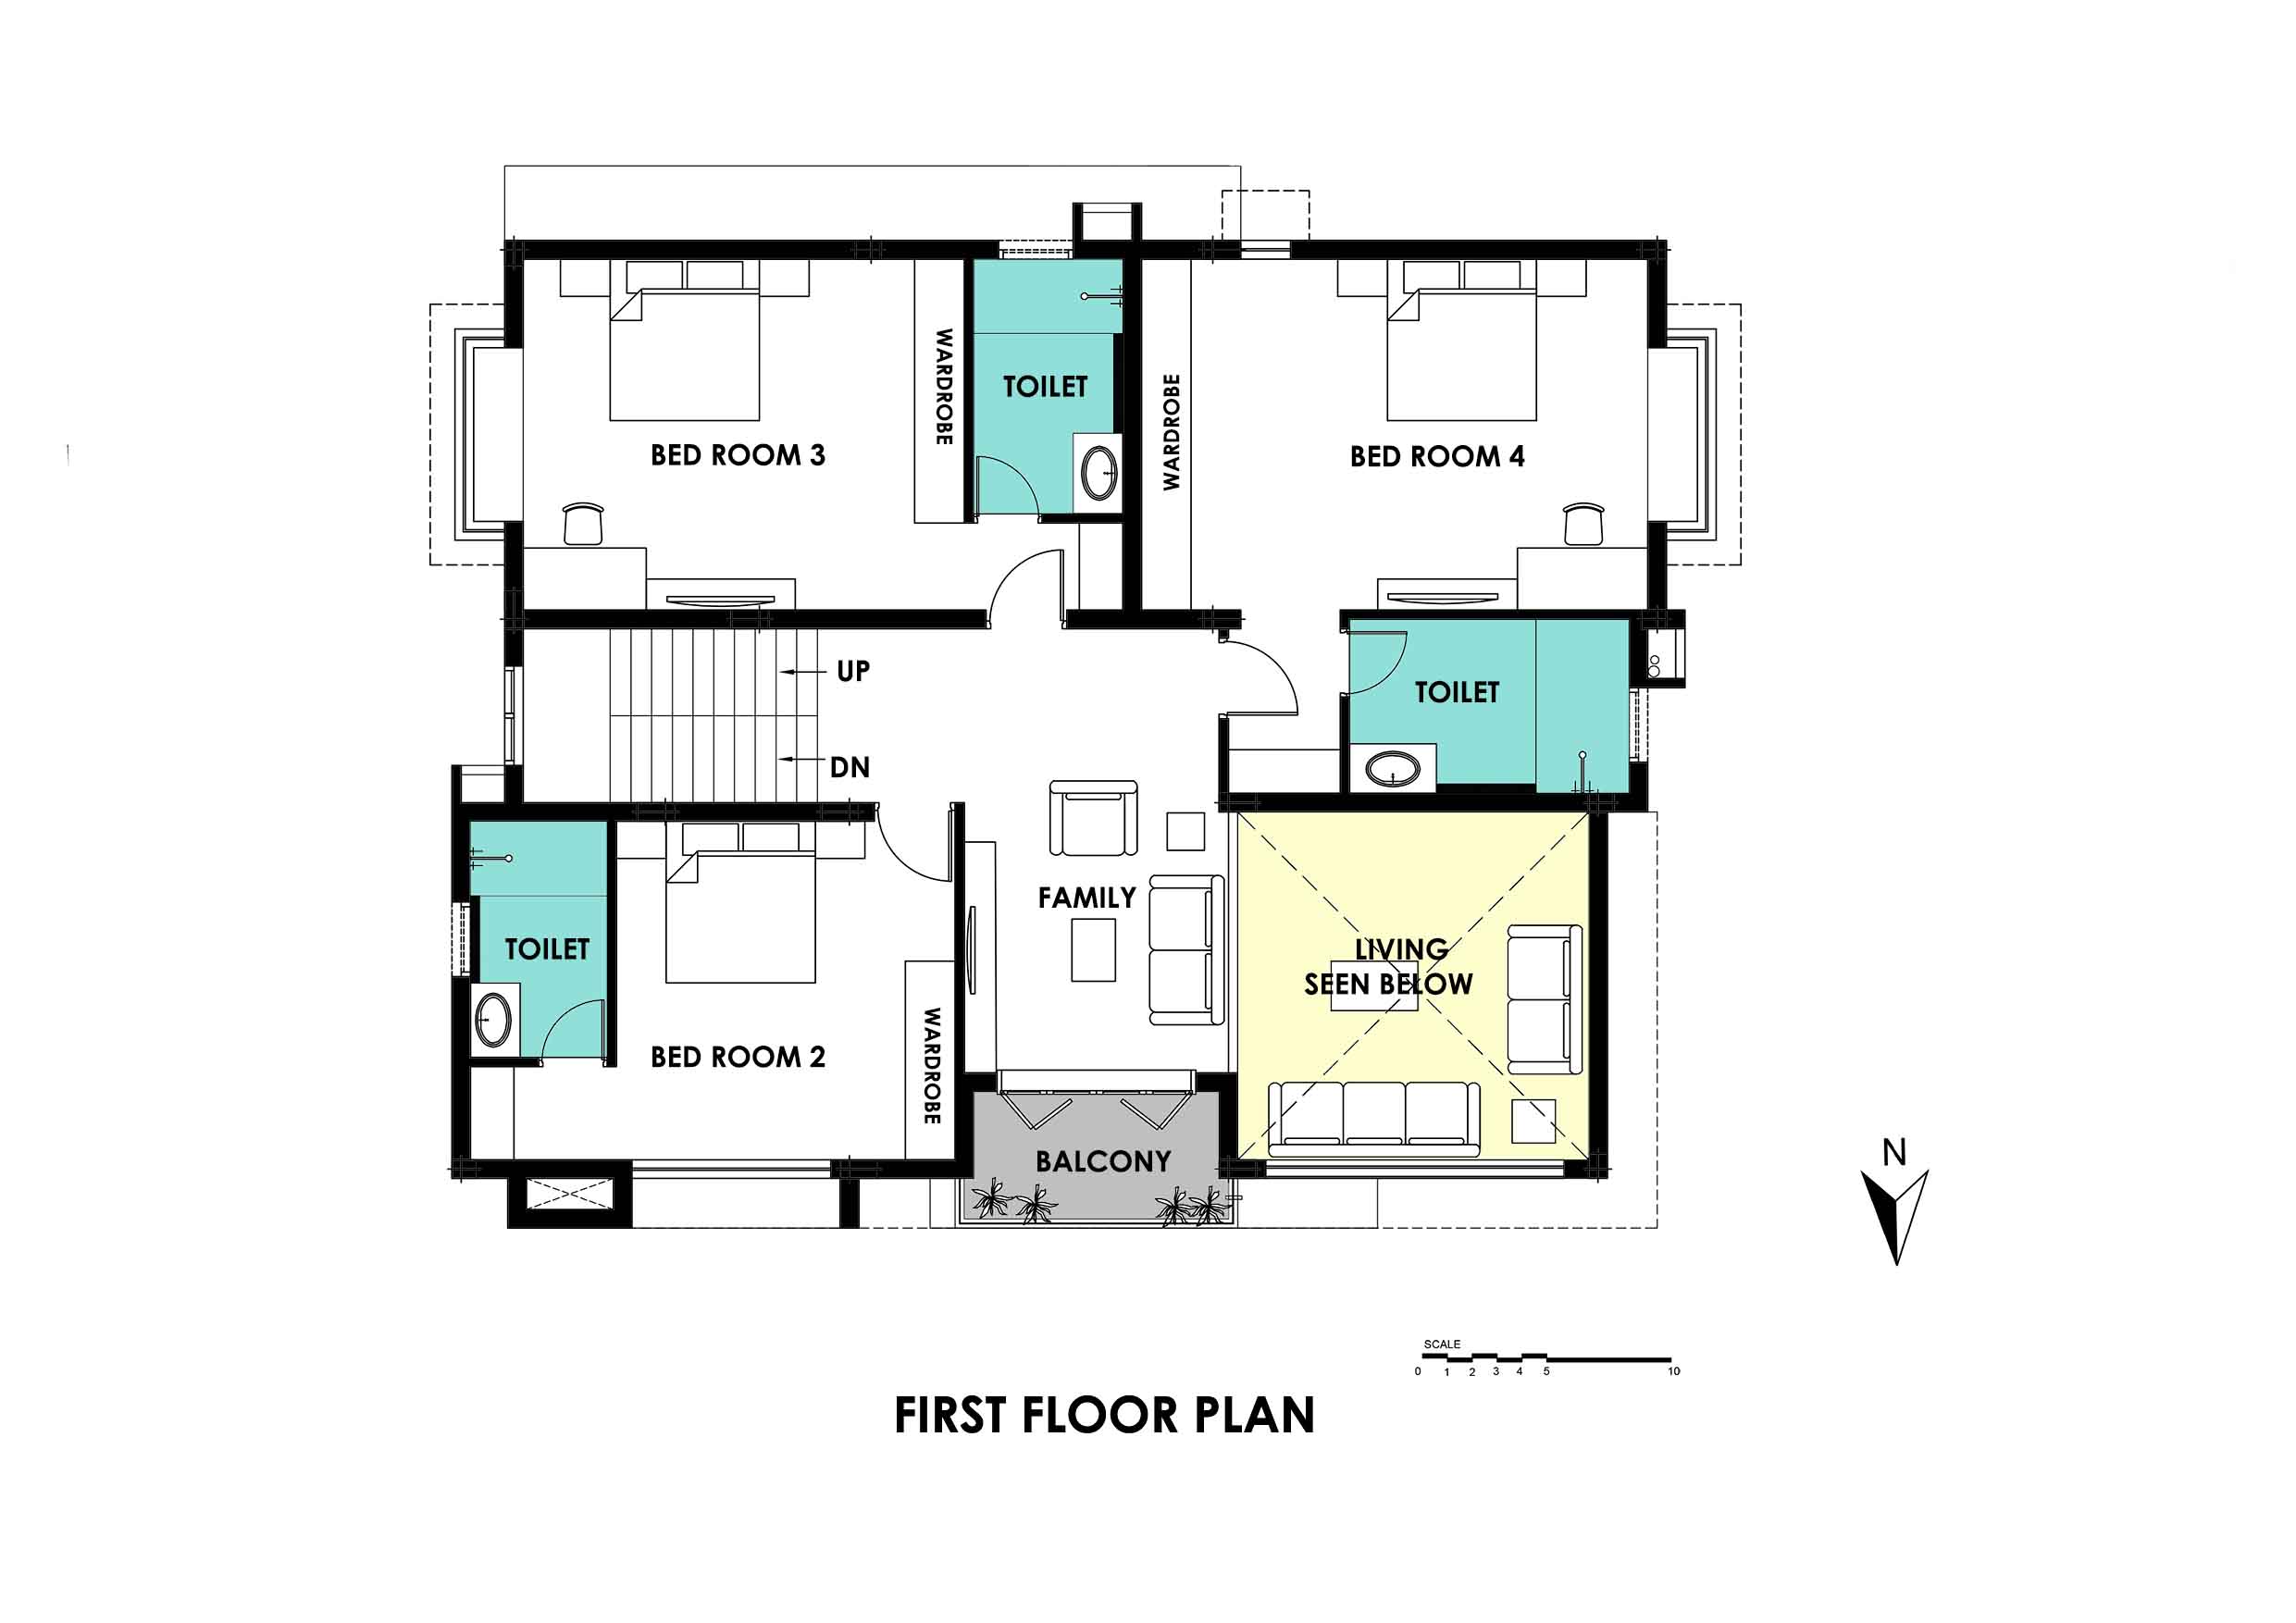 stone_and_stencil_house_first_floor_plan